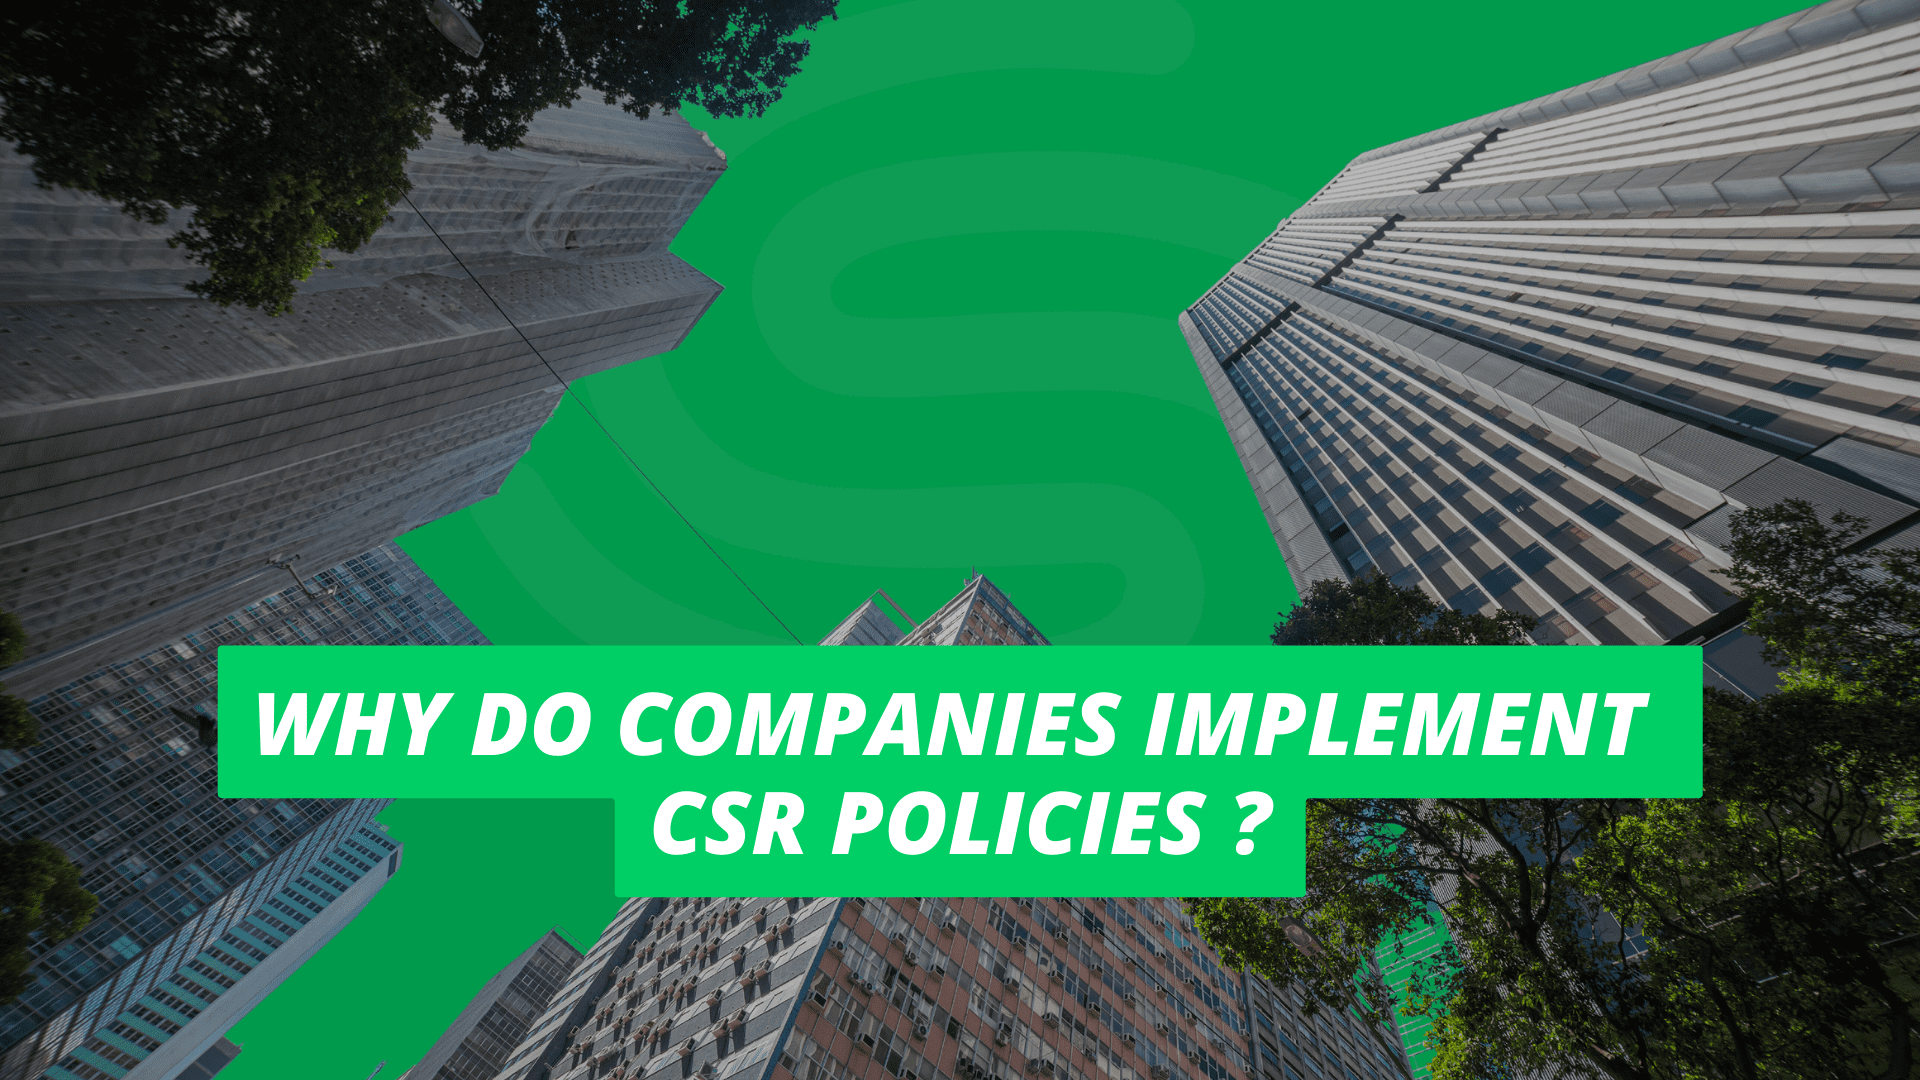 Why do companies implement CSR policies?